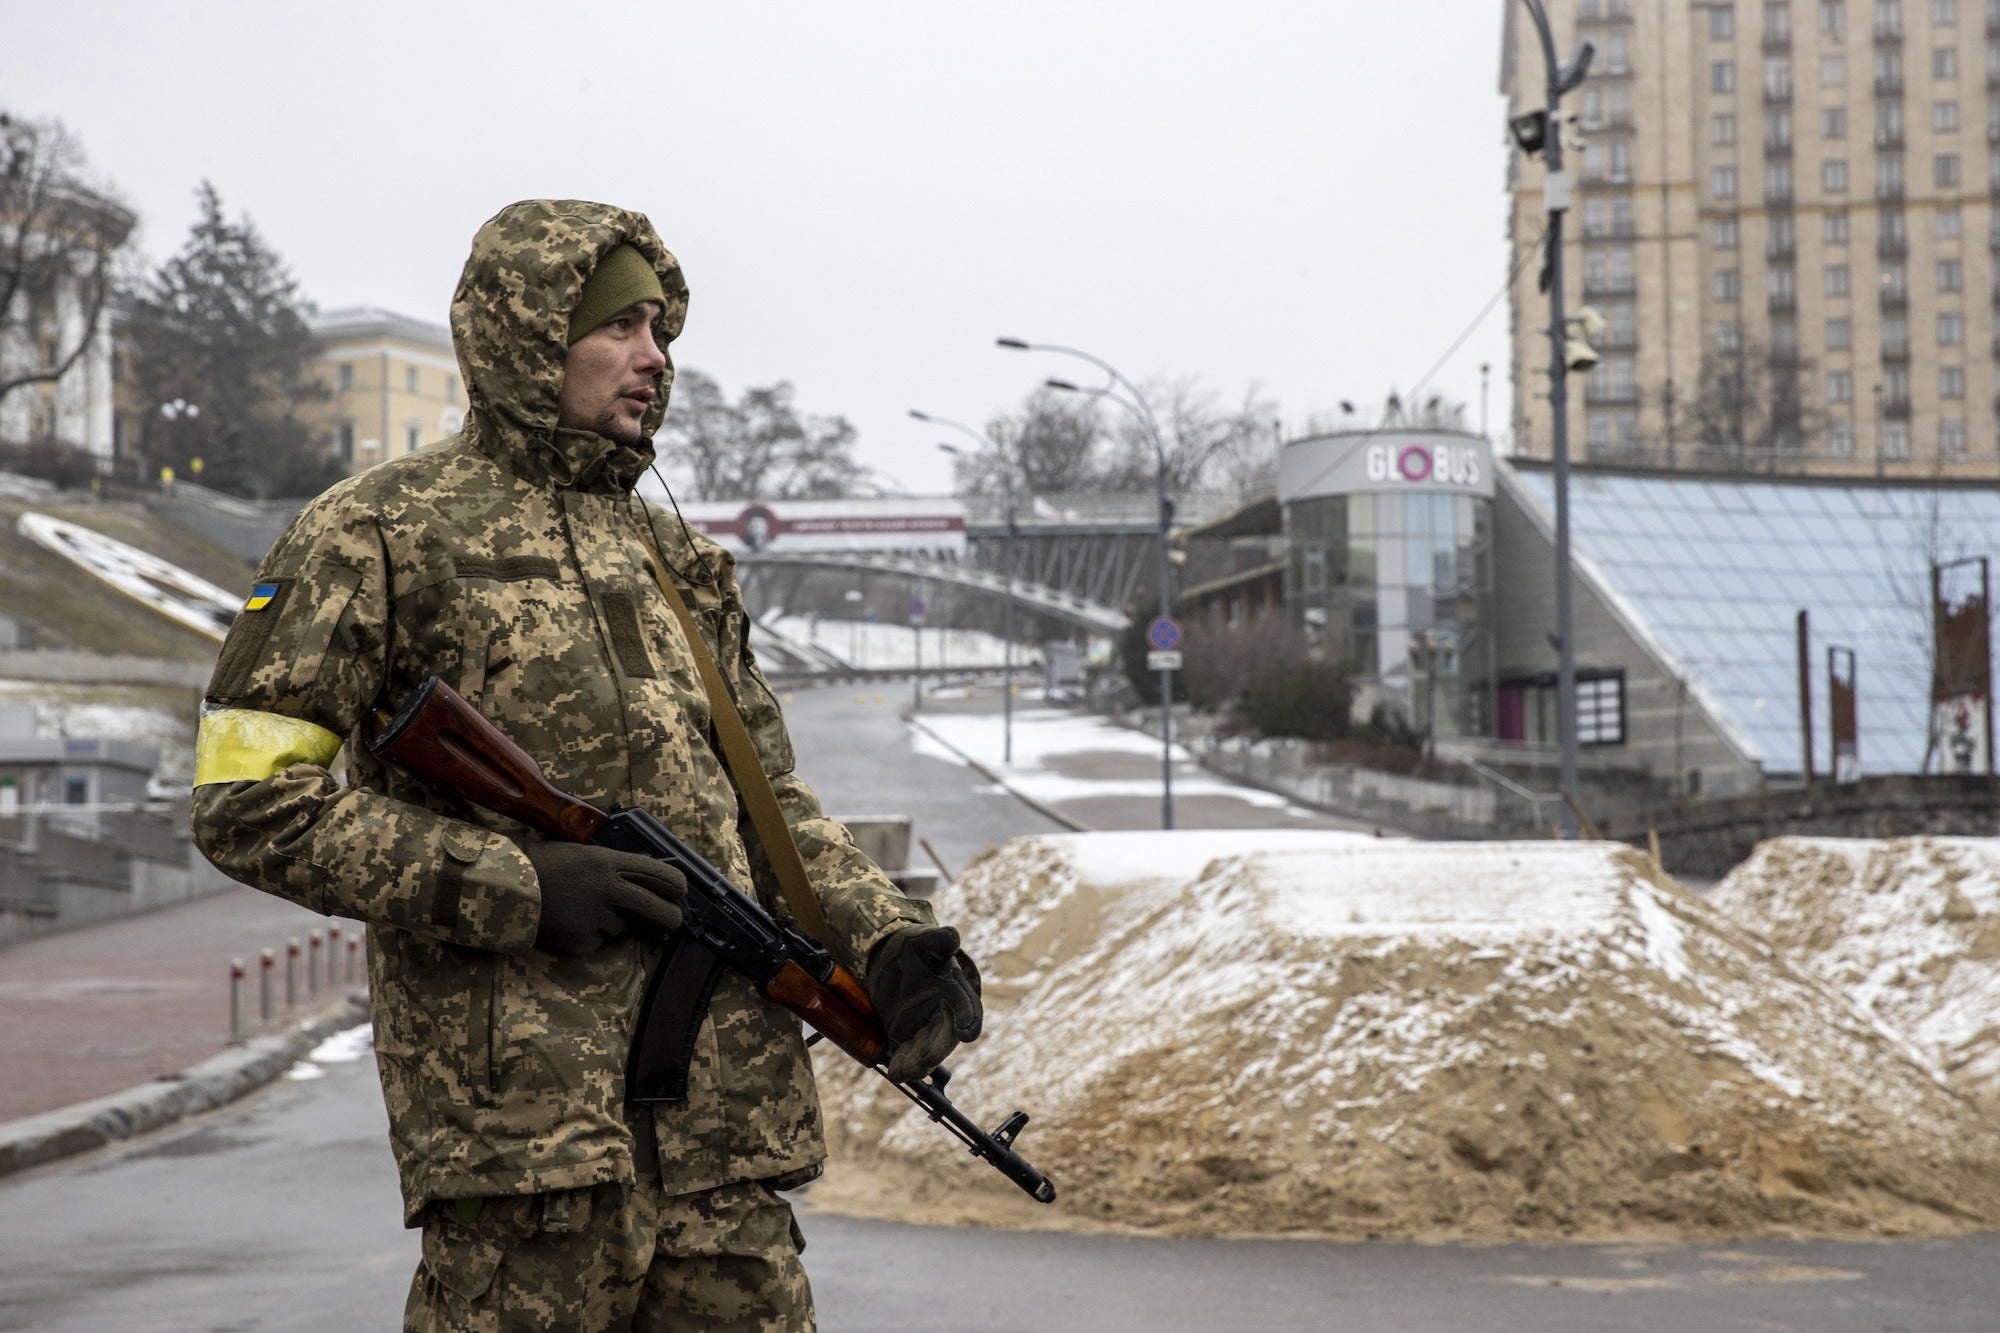 Opinion: How the war in Ukraine may affect global businesses